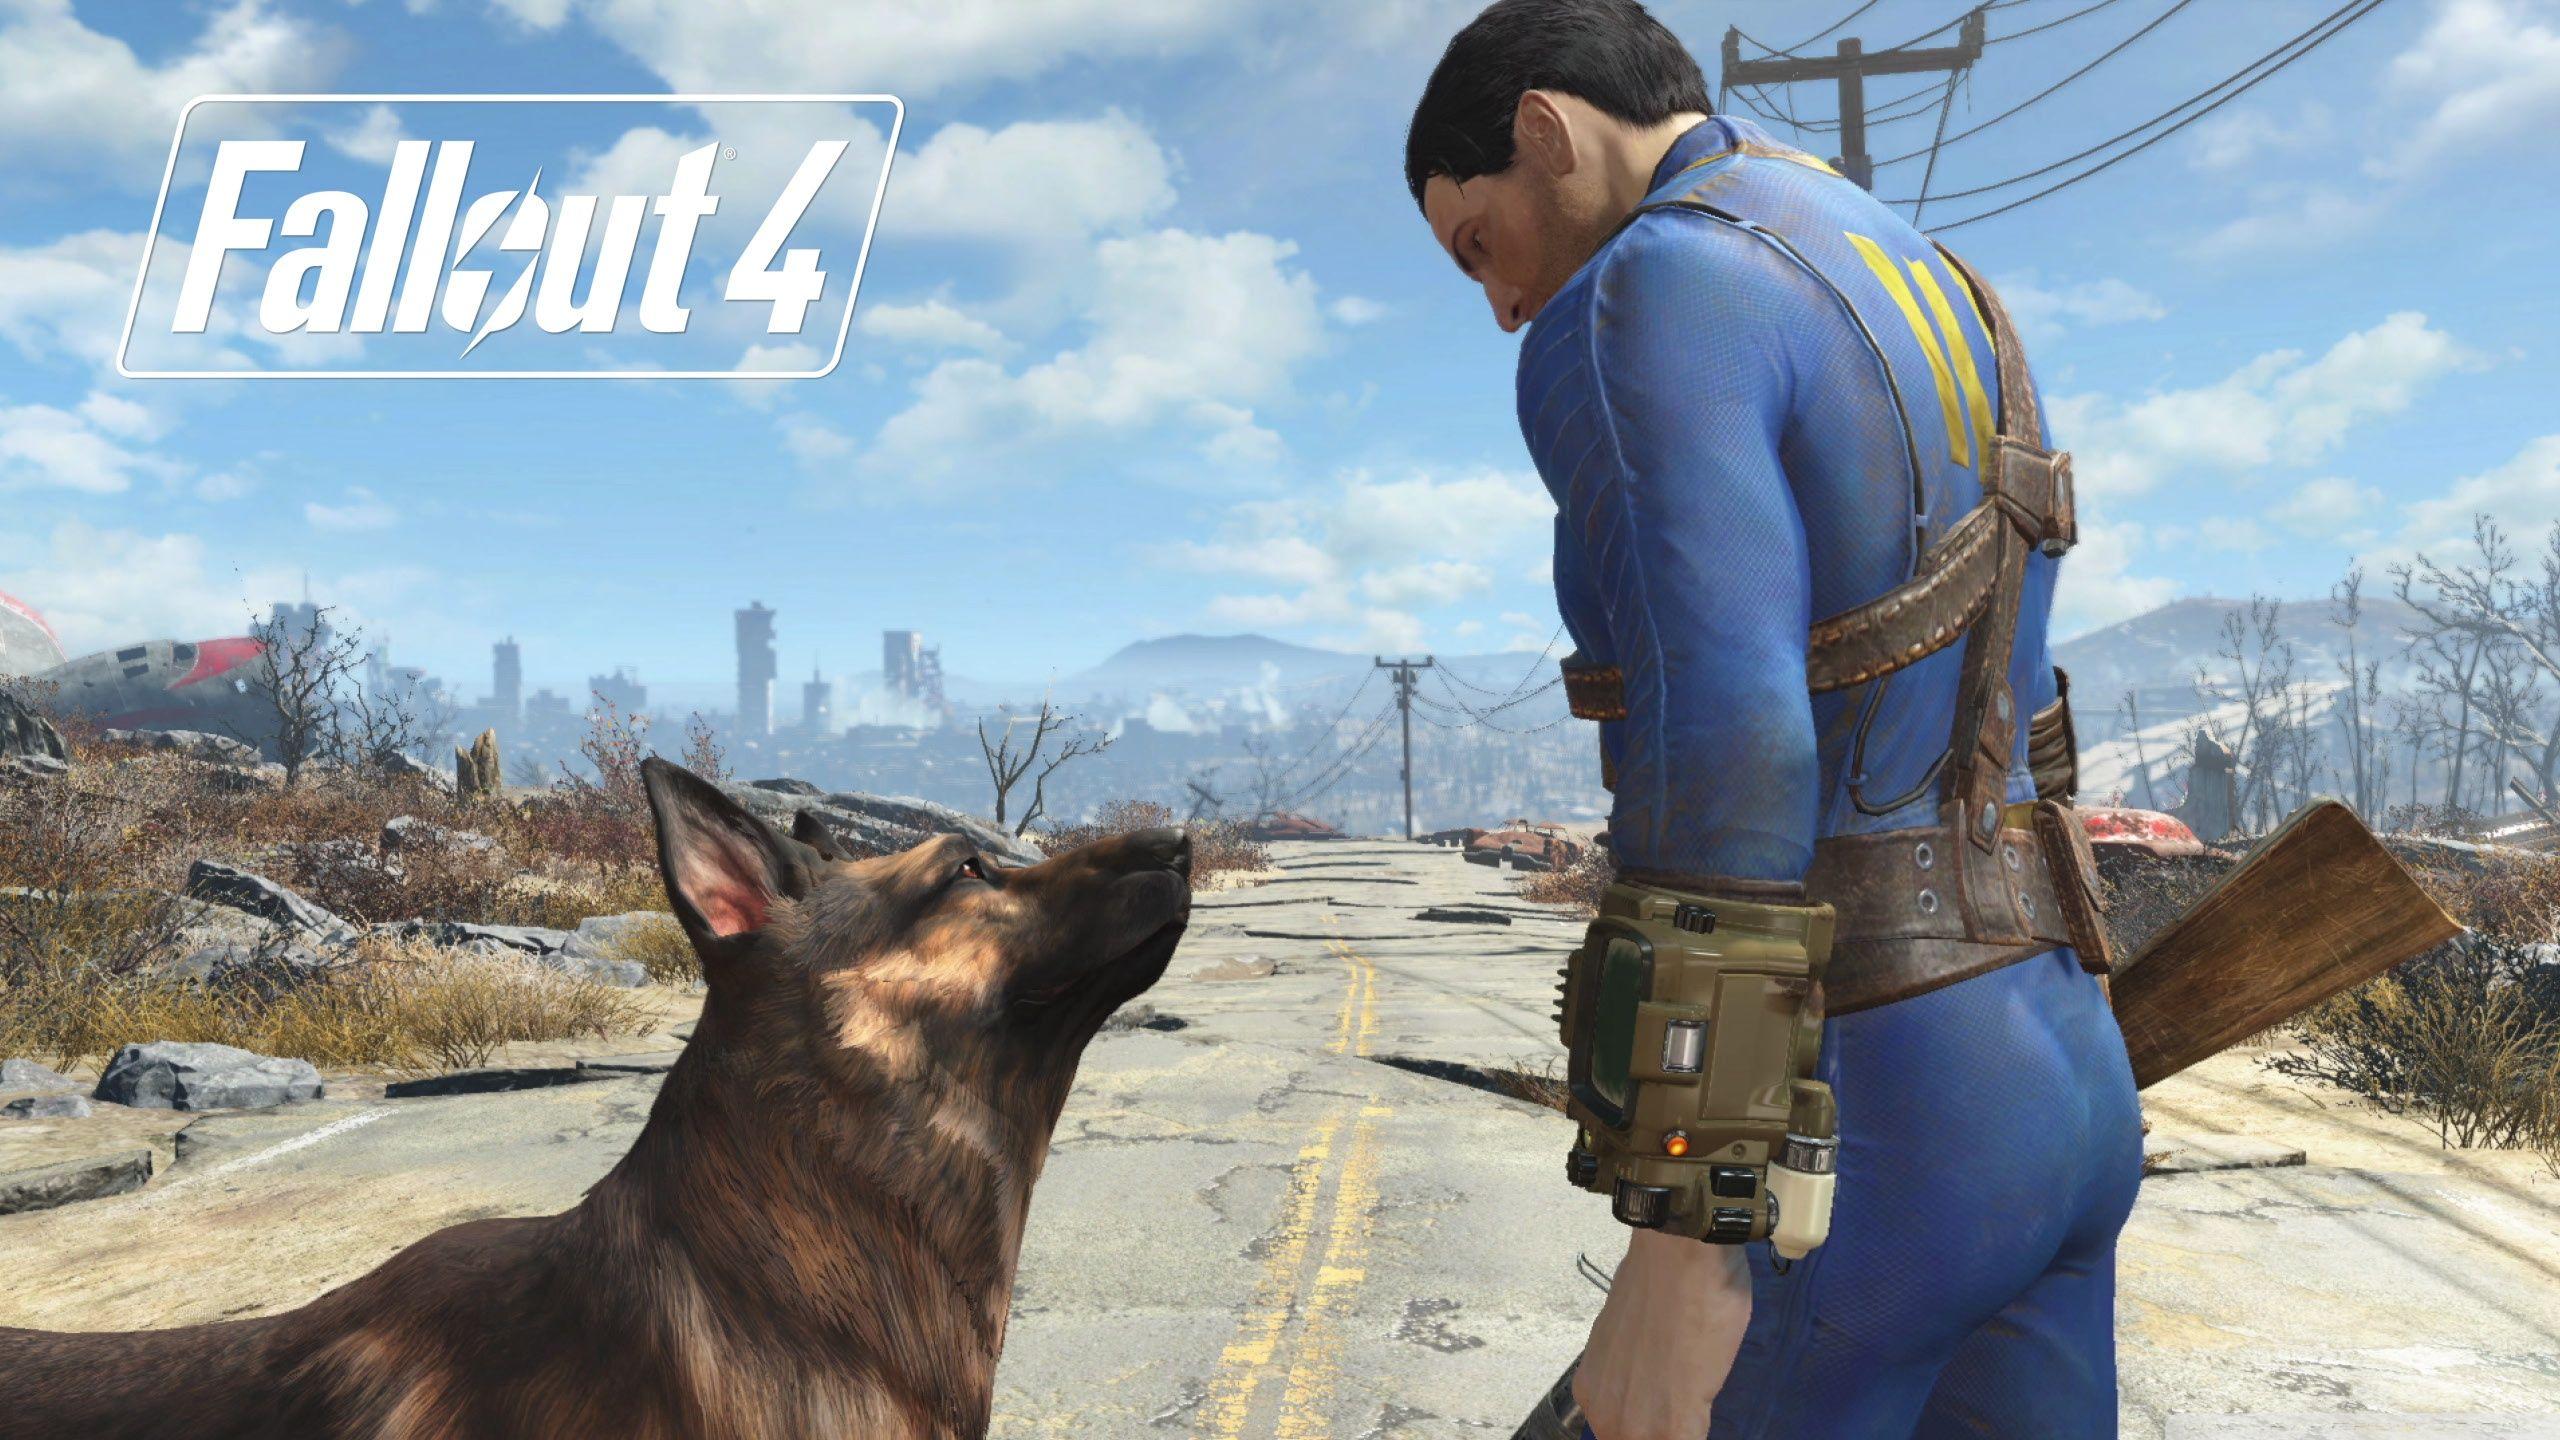 Dog Meat Fallout 4 Wallpapers Top Free Dog Meat Fallout 4 Backgrounds Wallpaperaccess